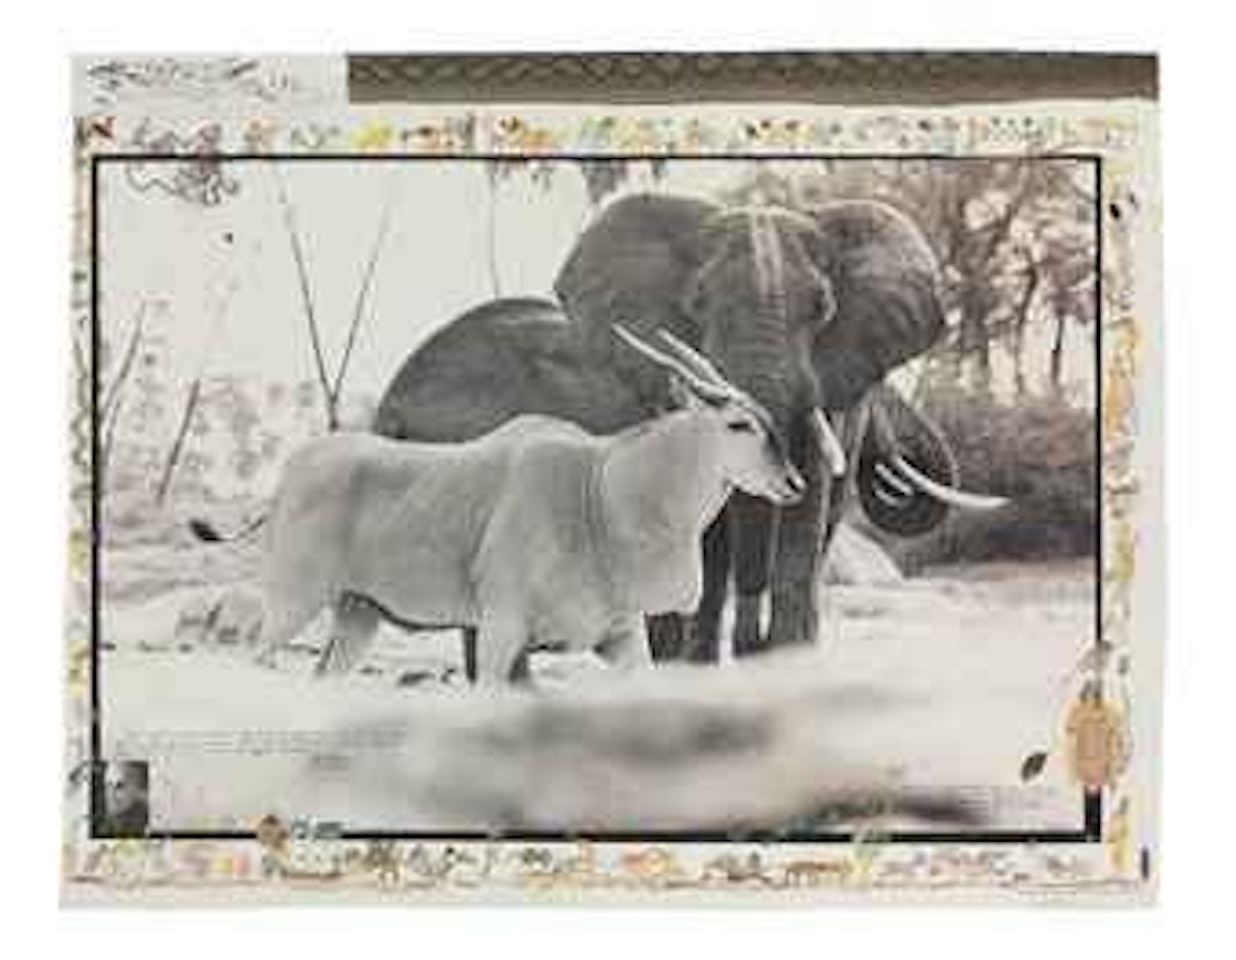 Bull Eland Passing Elephants Digging Water, near Kathamula Tsavo, North, for The End of the Game, February 1965 by Peter Beard